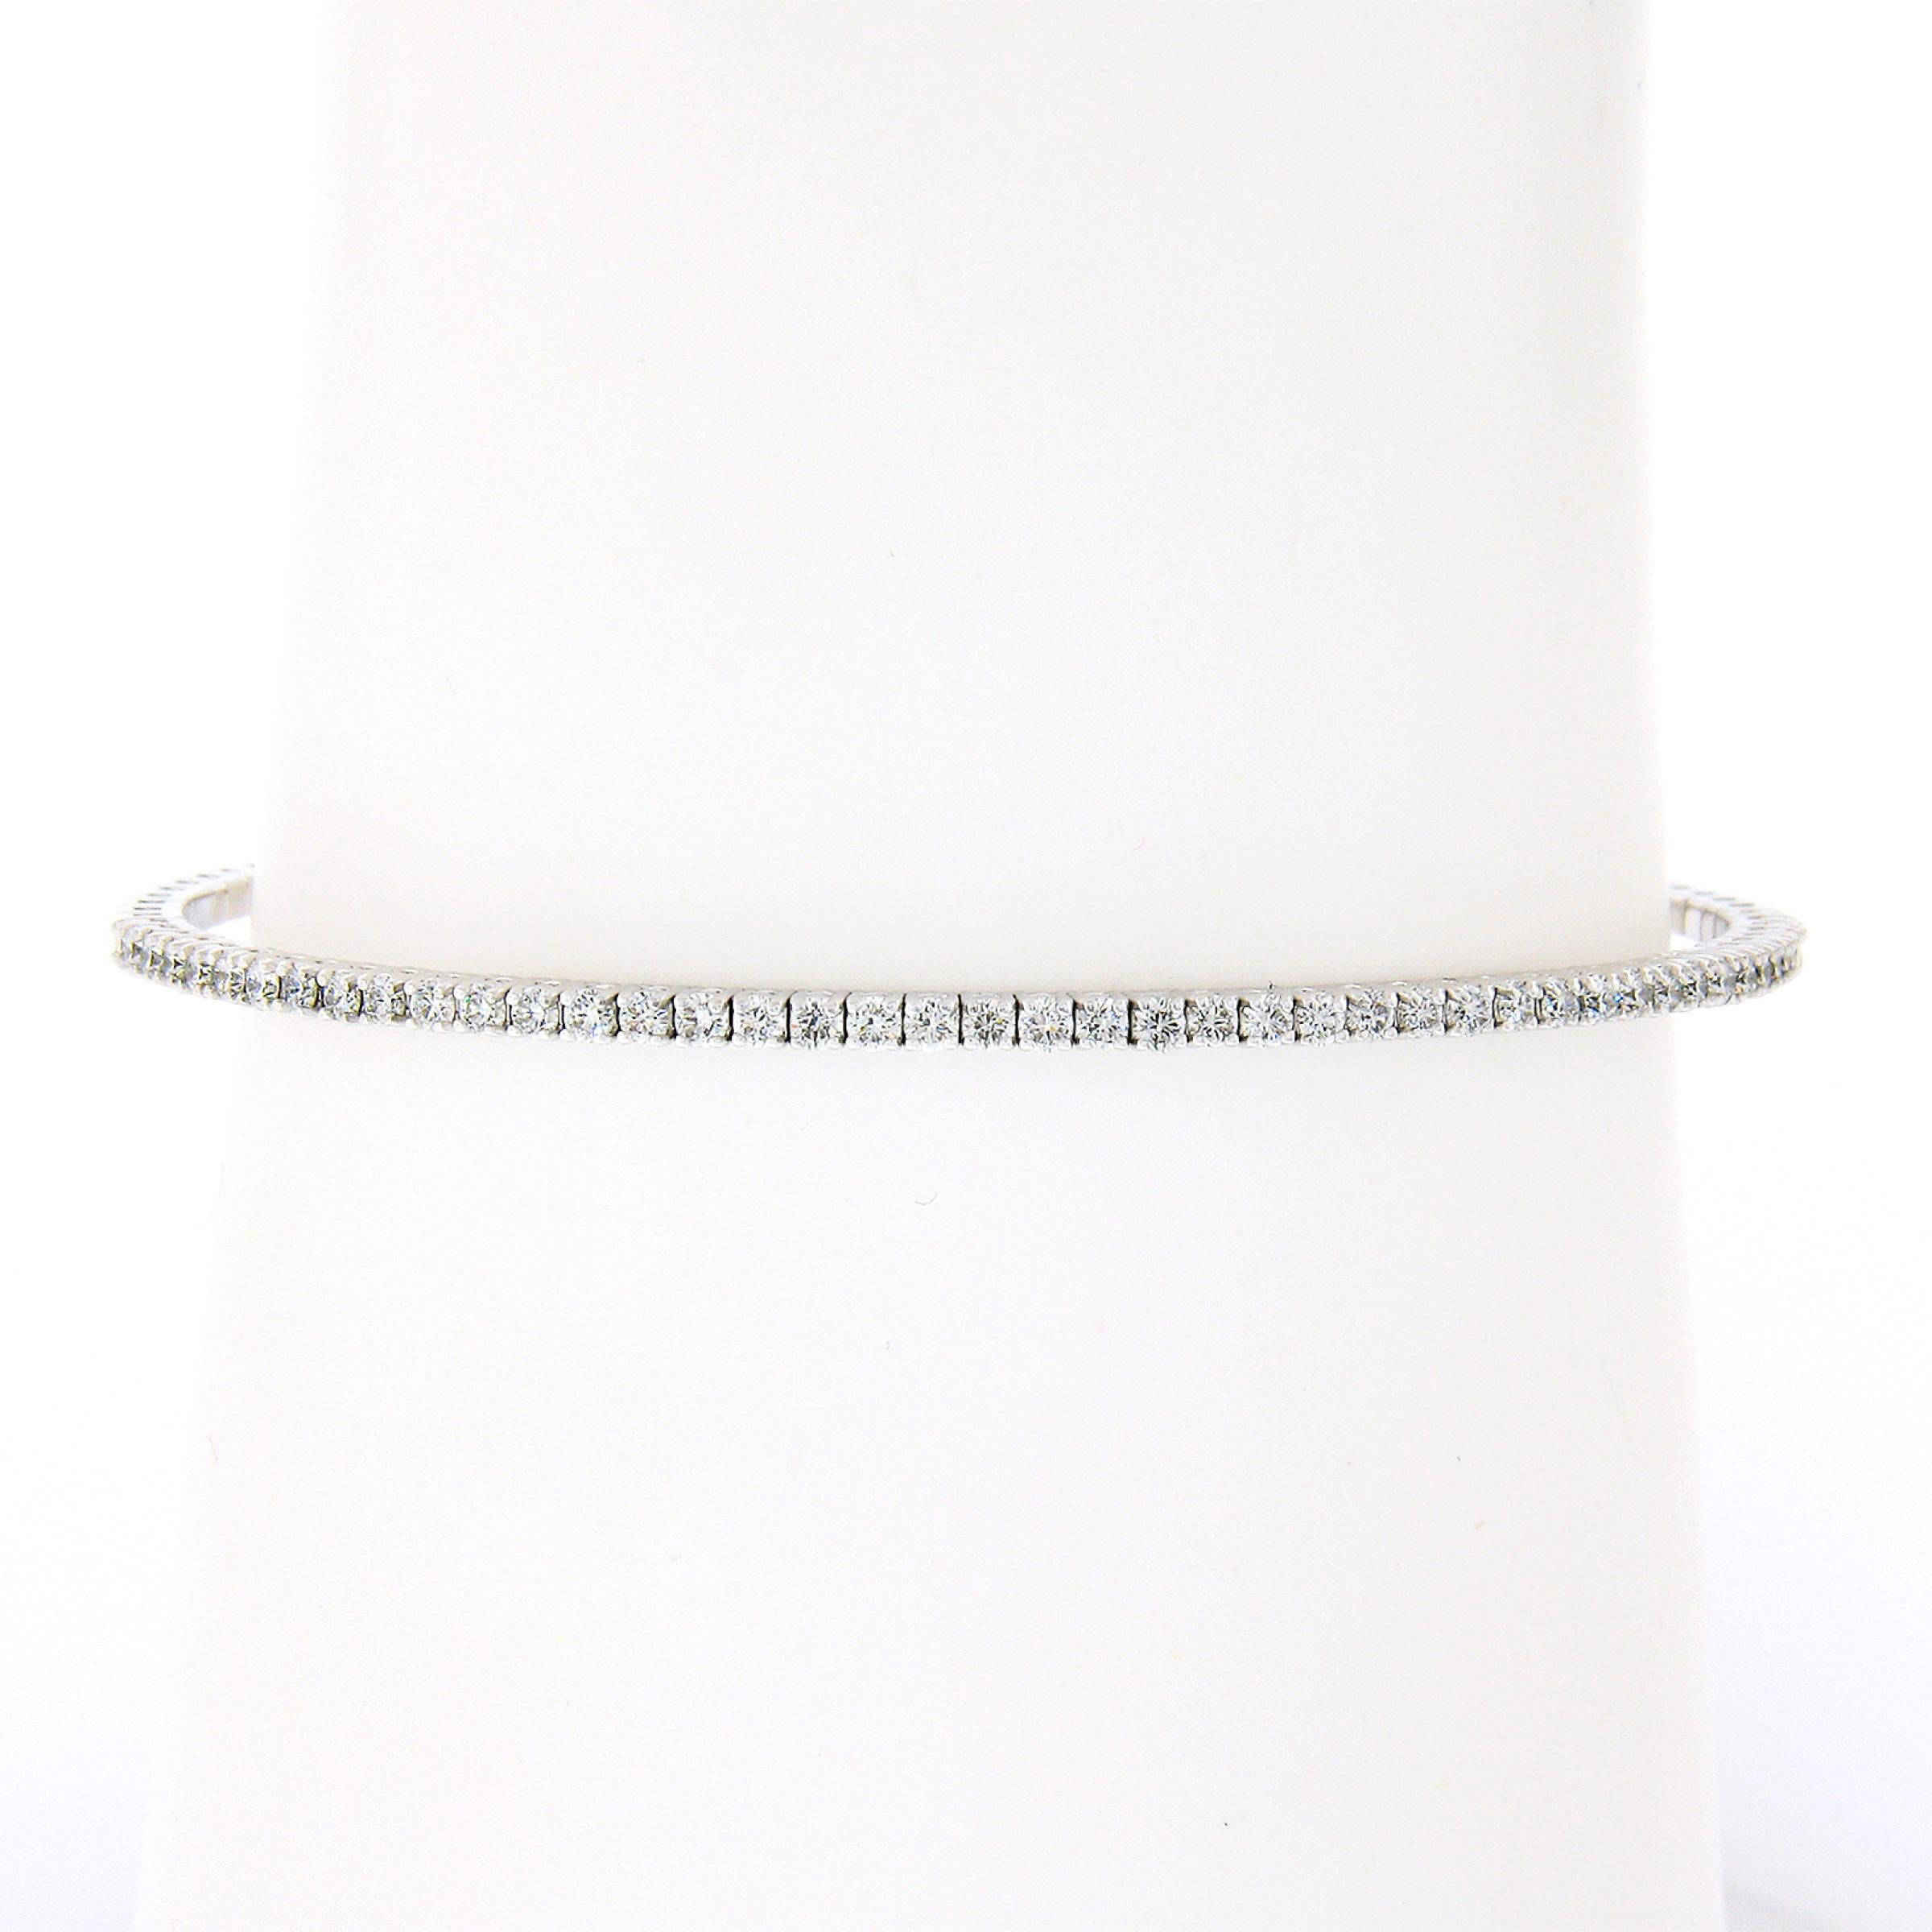 This beautiful, semi-flexible, bangle bracelet was newly crafted in solid 14k white gold and features super quality diamonds neatly set across its top. These fiery diamonds are round brilliant cut and total exactly 0.90 carats, displaying absolutely